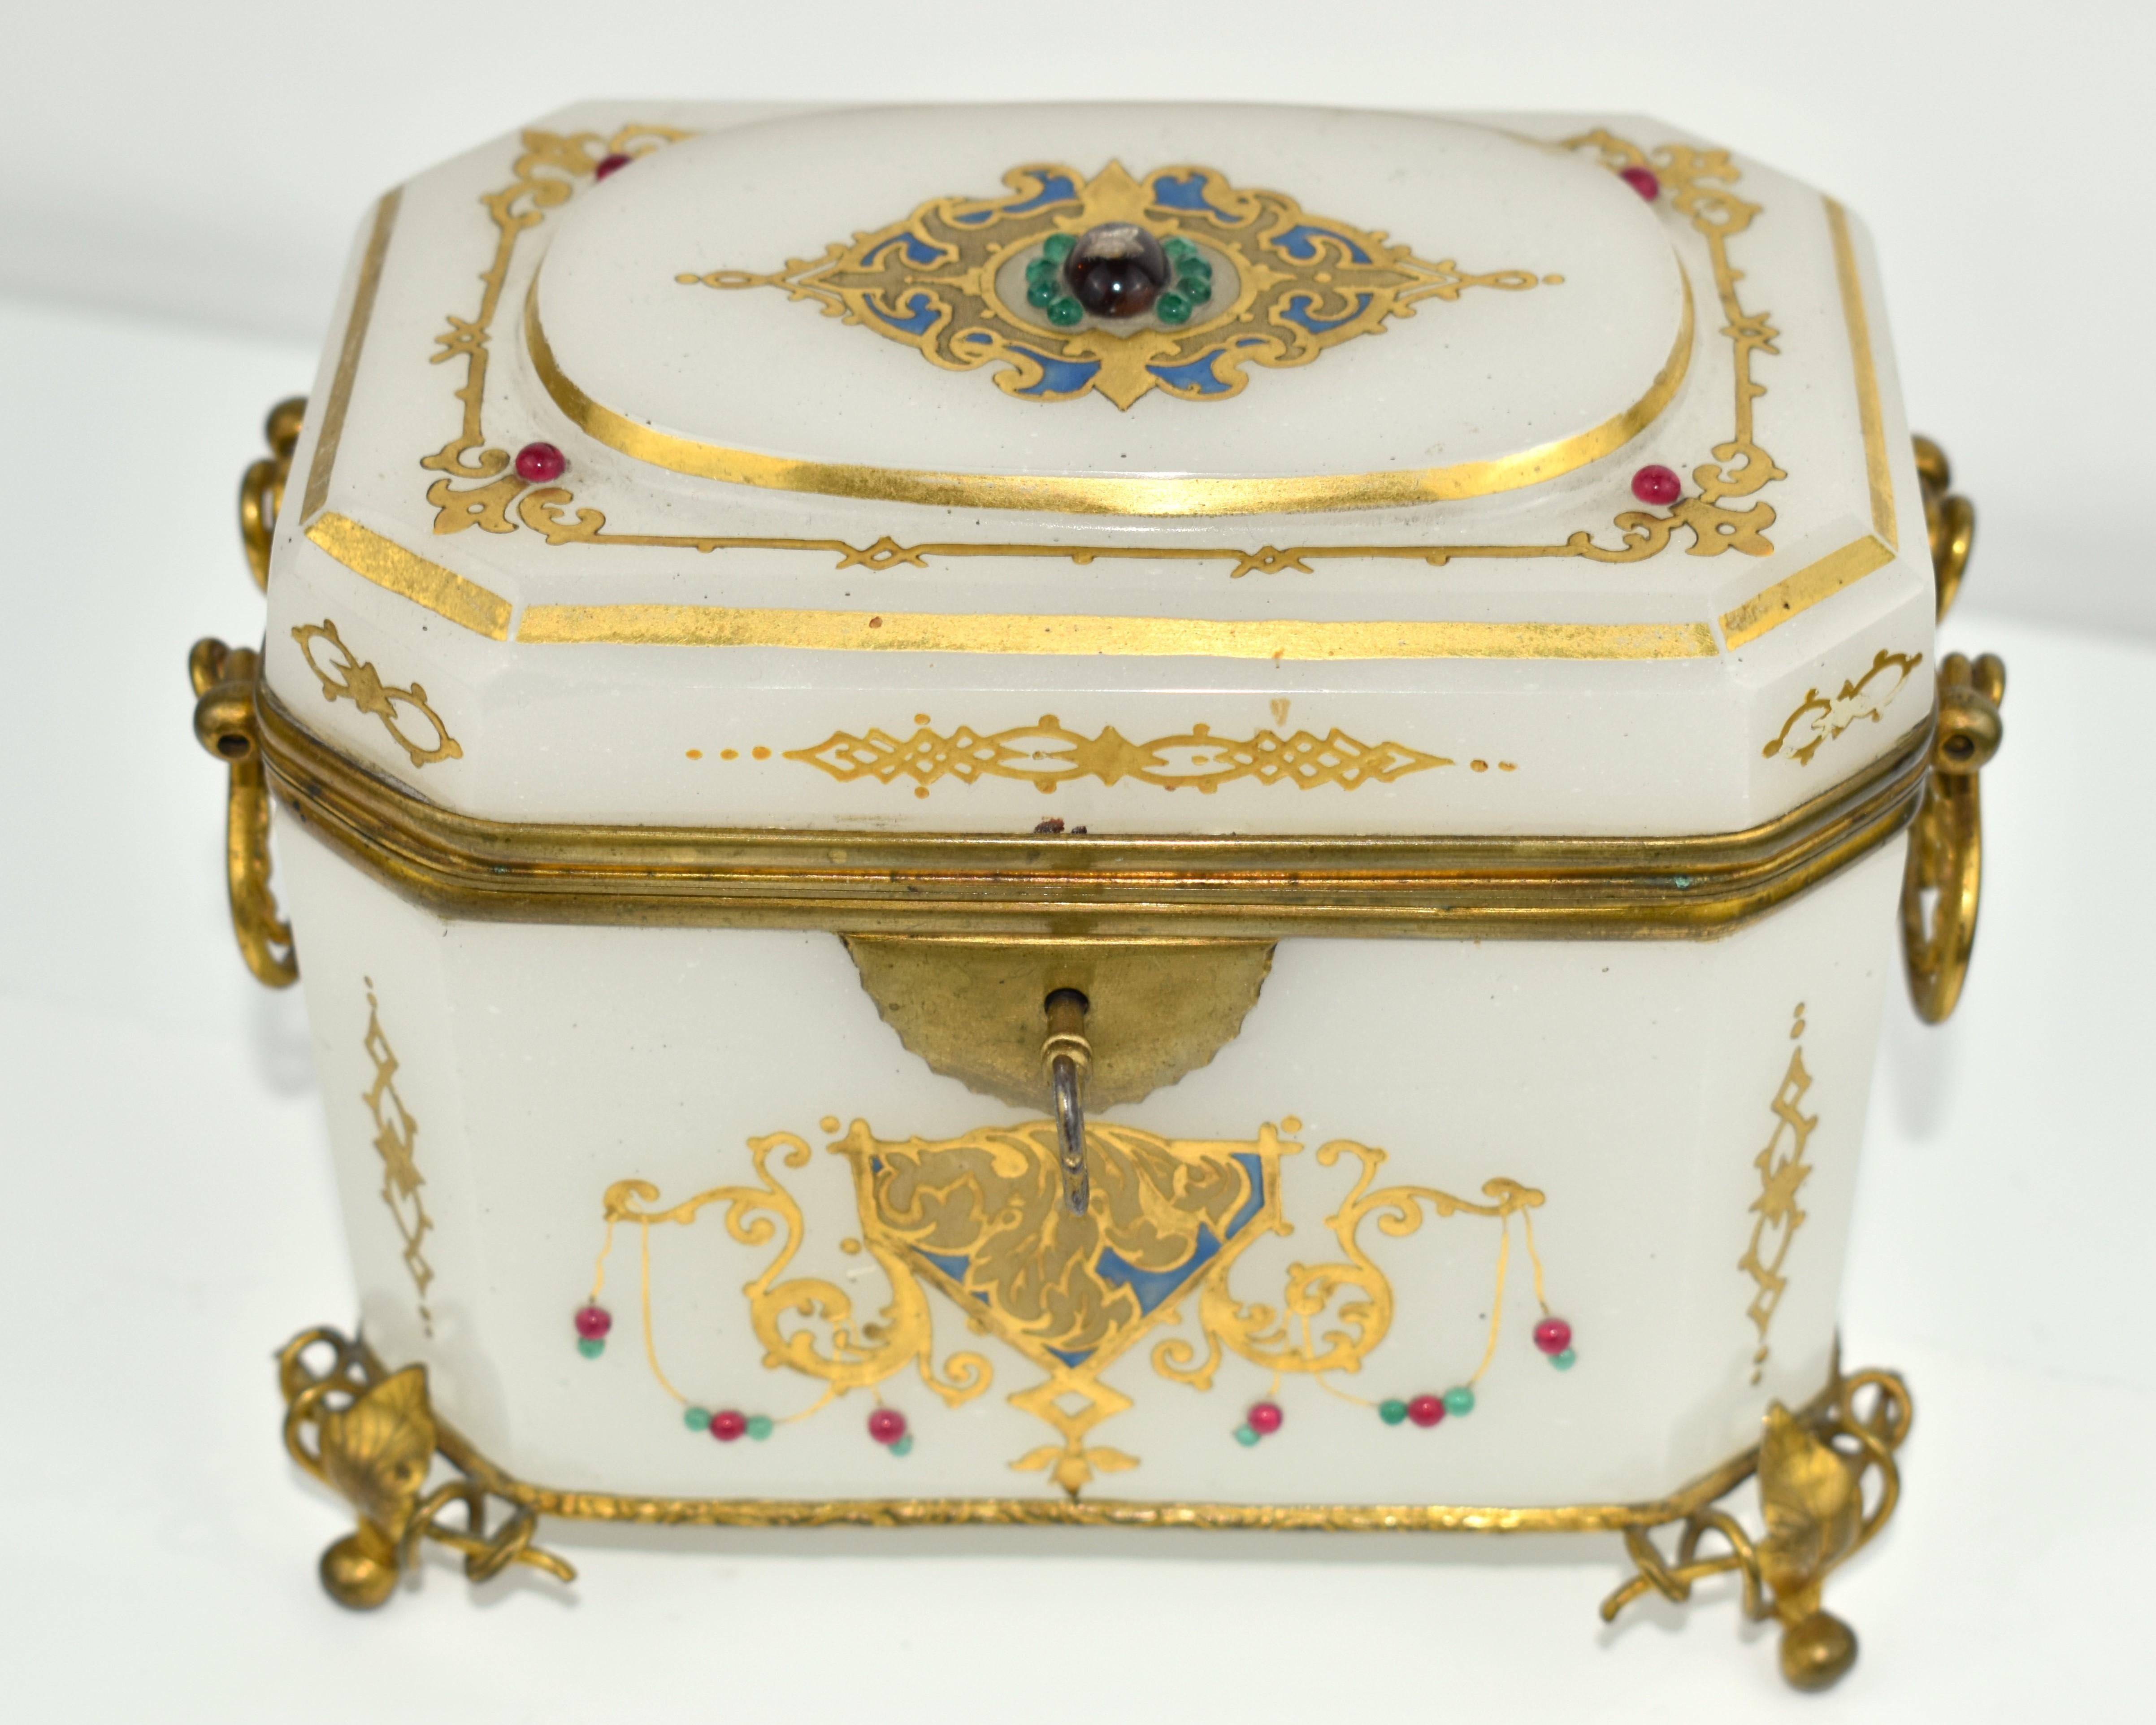 Very Rare Milky White Jewelry Box with Hinged Bronze Mounts

Standing on Dore Bronze Feet and Matching Swinging Handles

Lid and Base are Both Framed in Bronze

Generously Enameled all Around with Colourful Beads and Gilding Decoration

Original Key